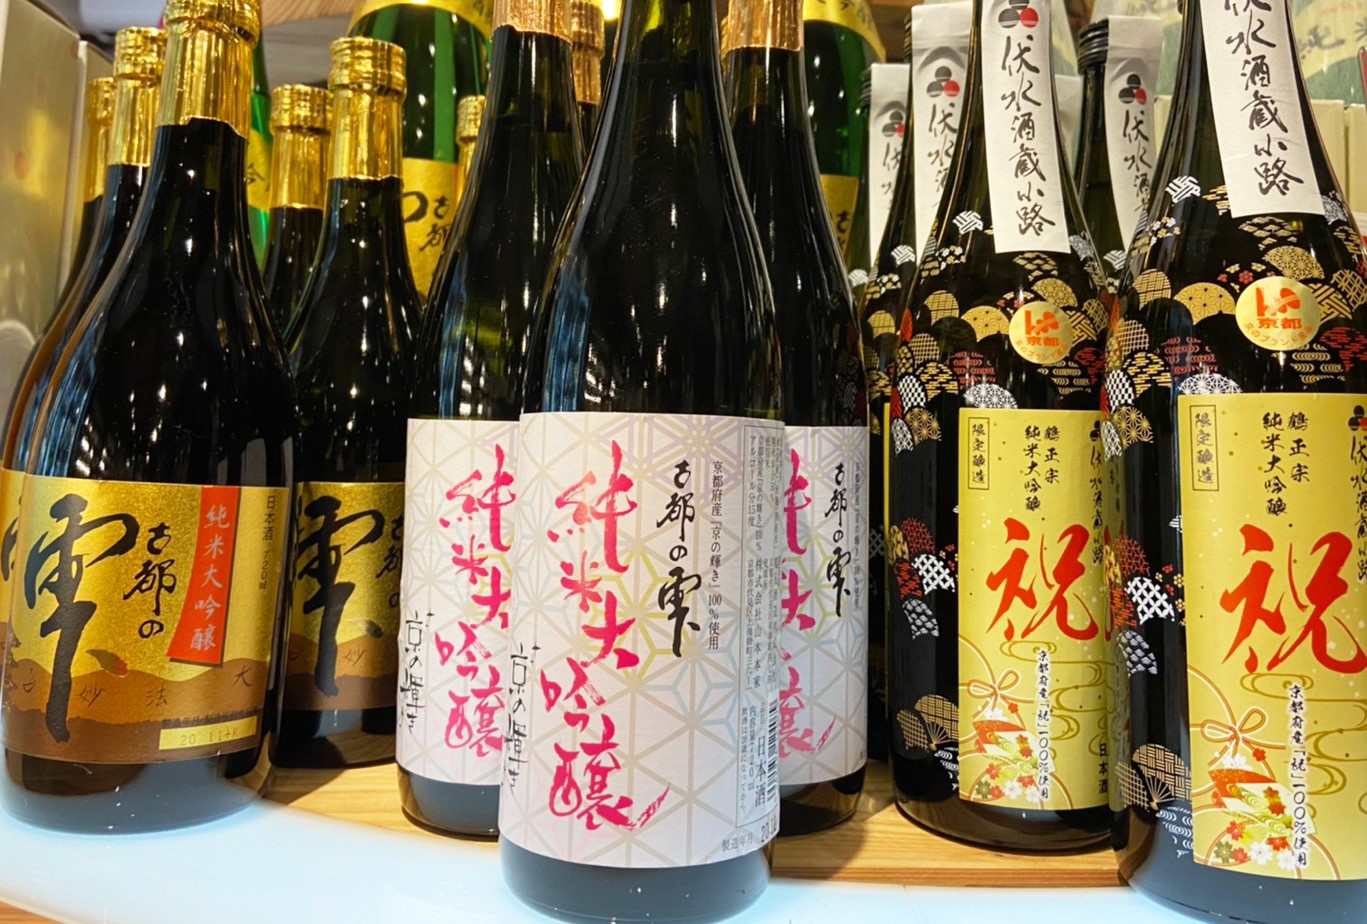 What kind of sake brand is 古都の雫 Koto no Shizuku(the drop of the ancient city)?